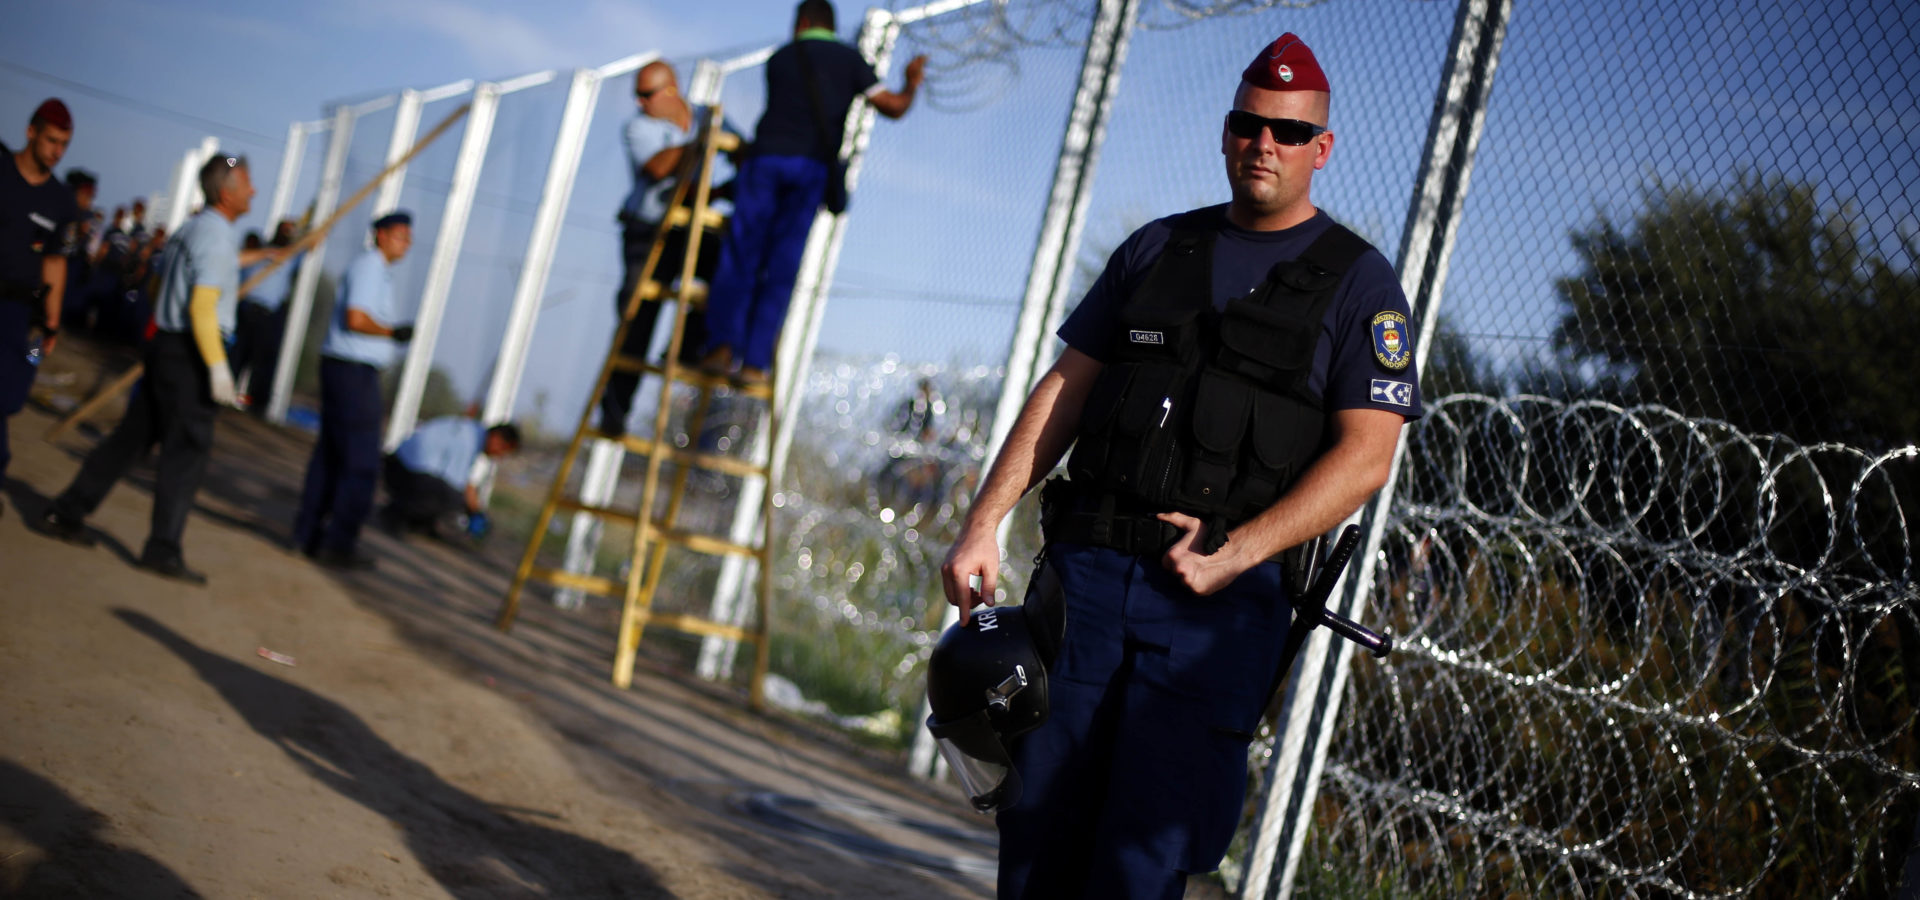 A police officer controls the area as workers begin to erect a fence after Hungarian police officers close the border between Serbia and Hungary in Roszke, southern Hungary, Monday, Sept. 14, 2015.